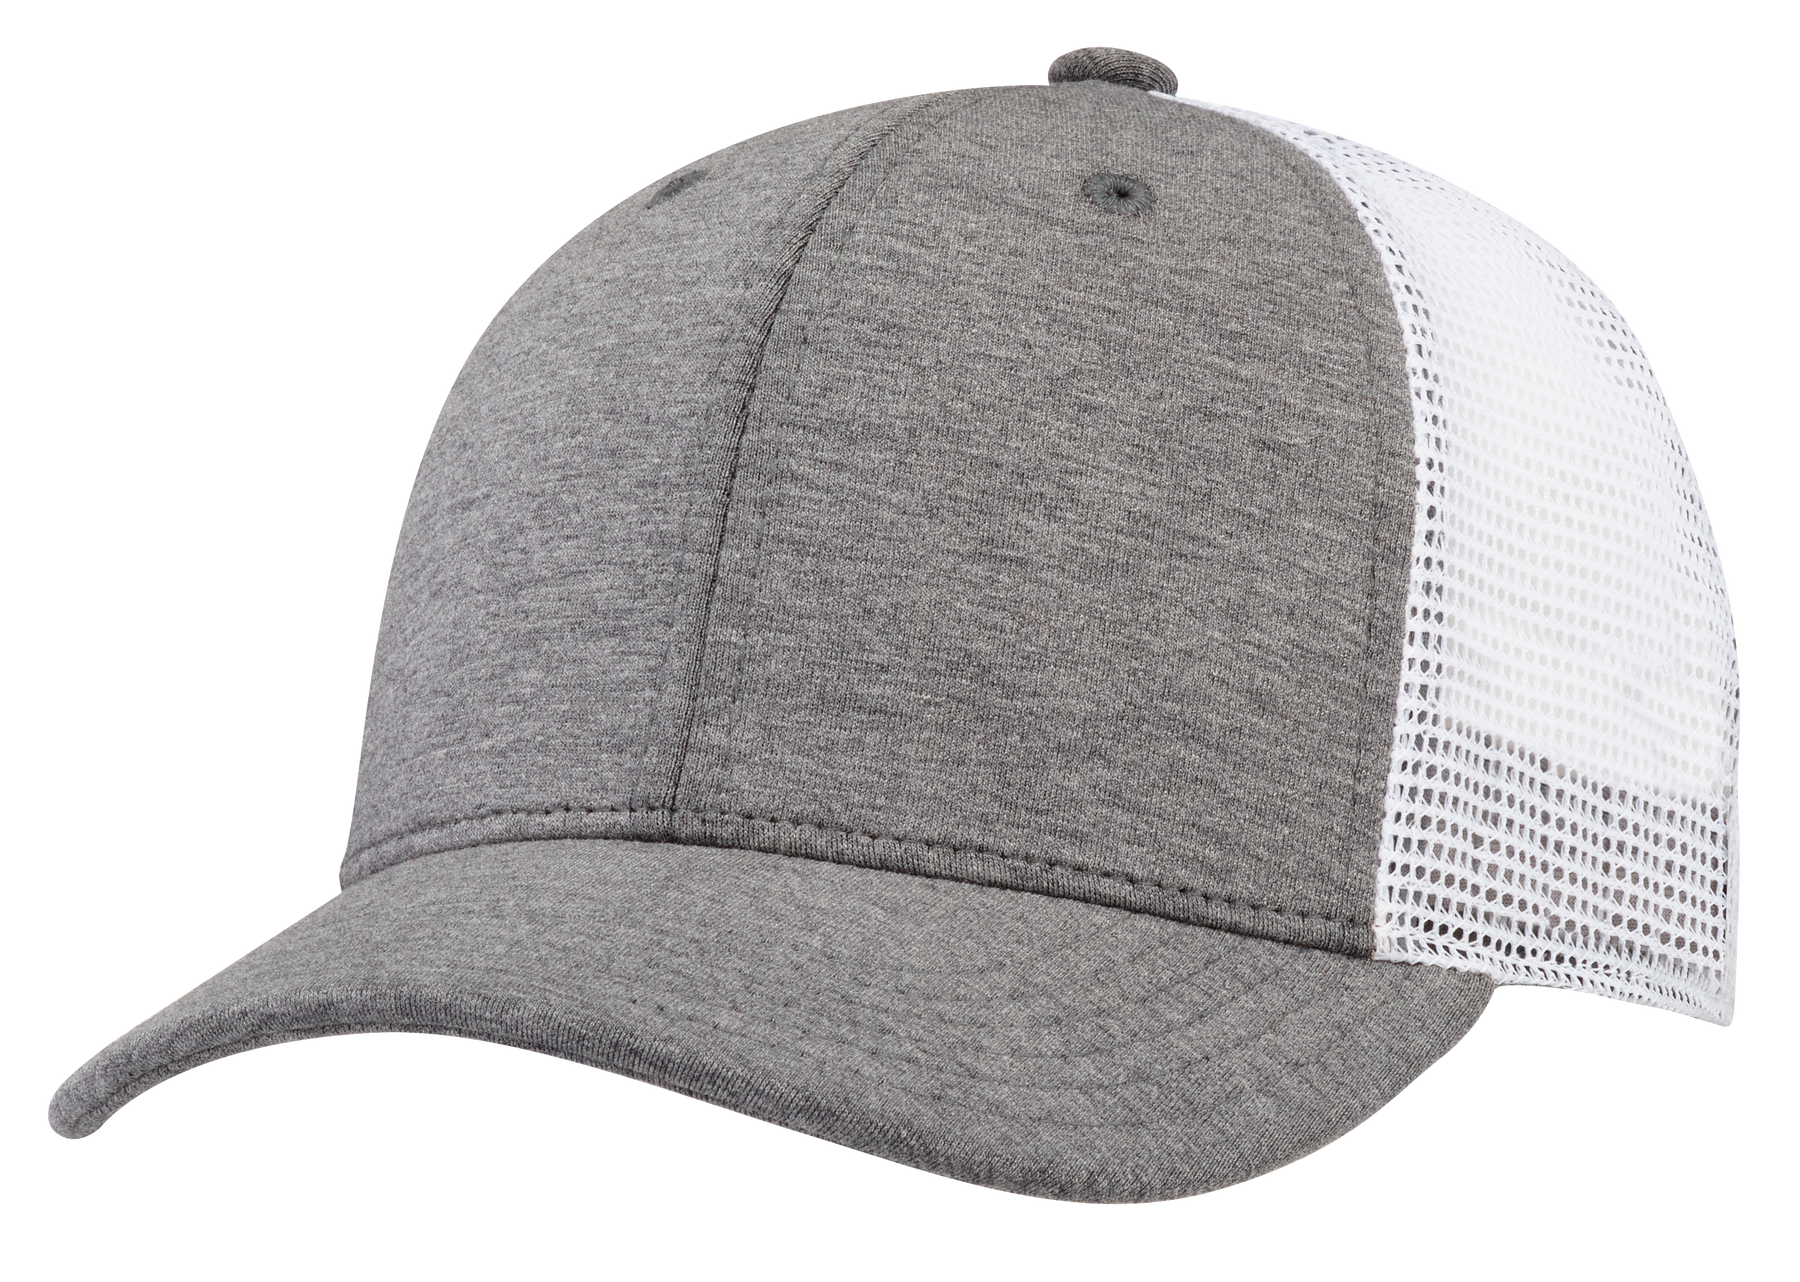 CCM Team Structured Mesh Adjustable Cap Youth